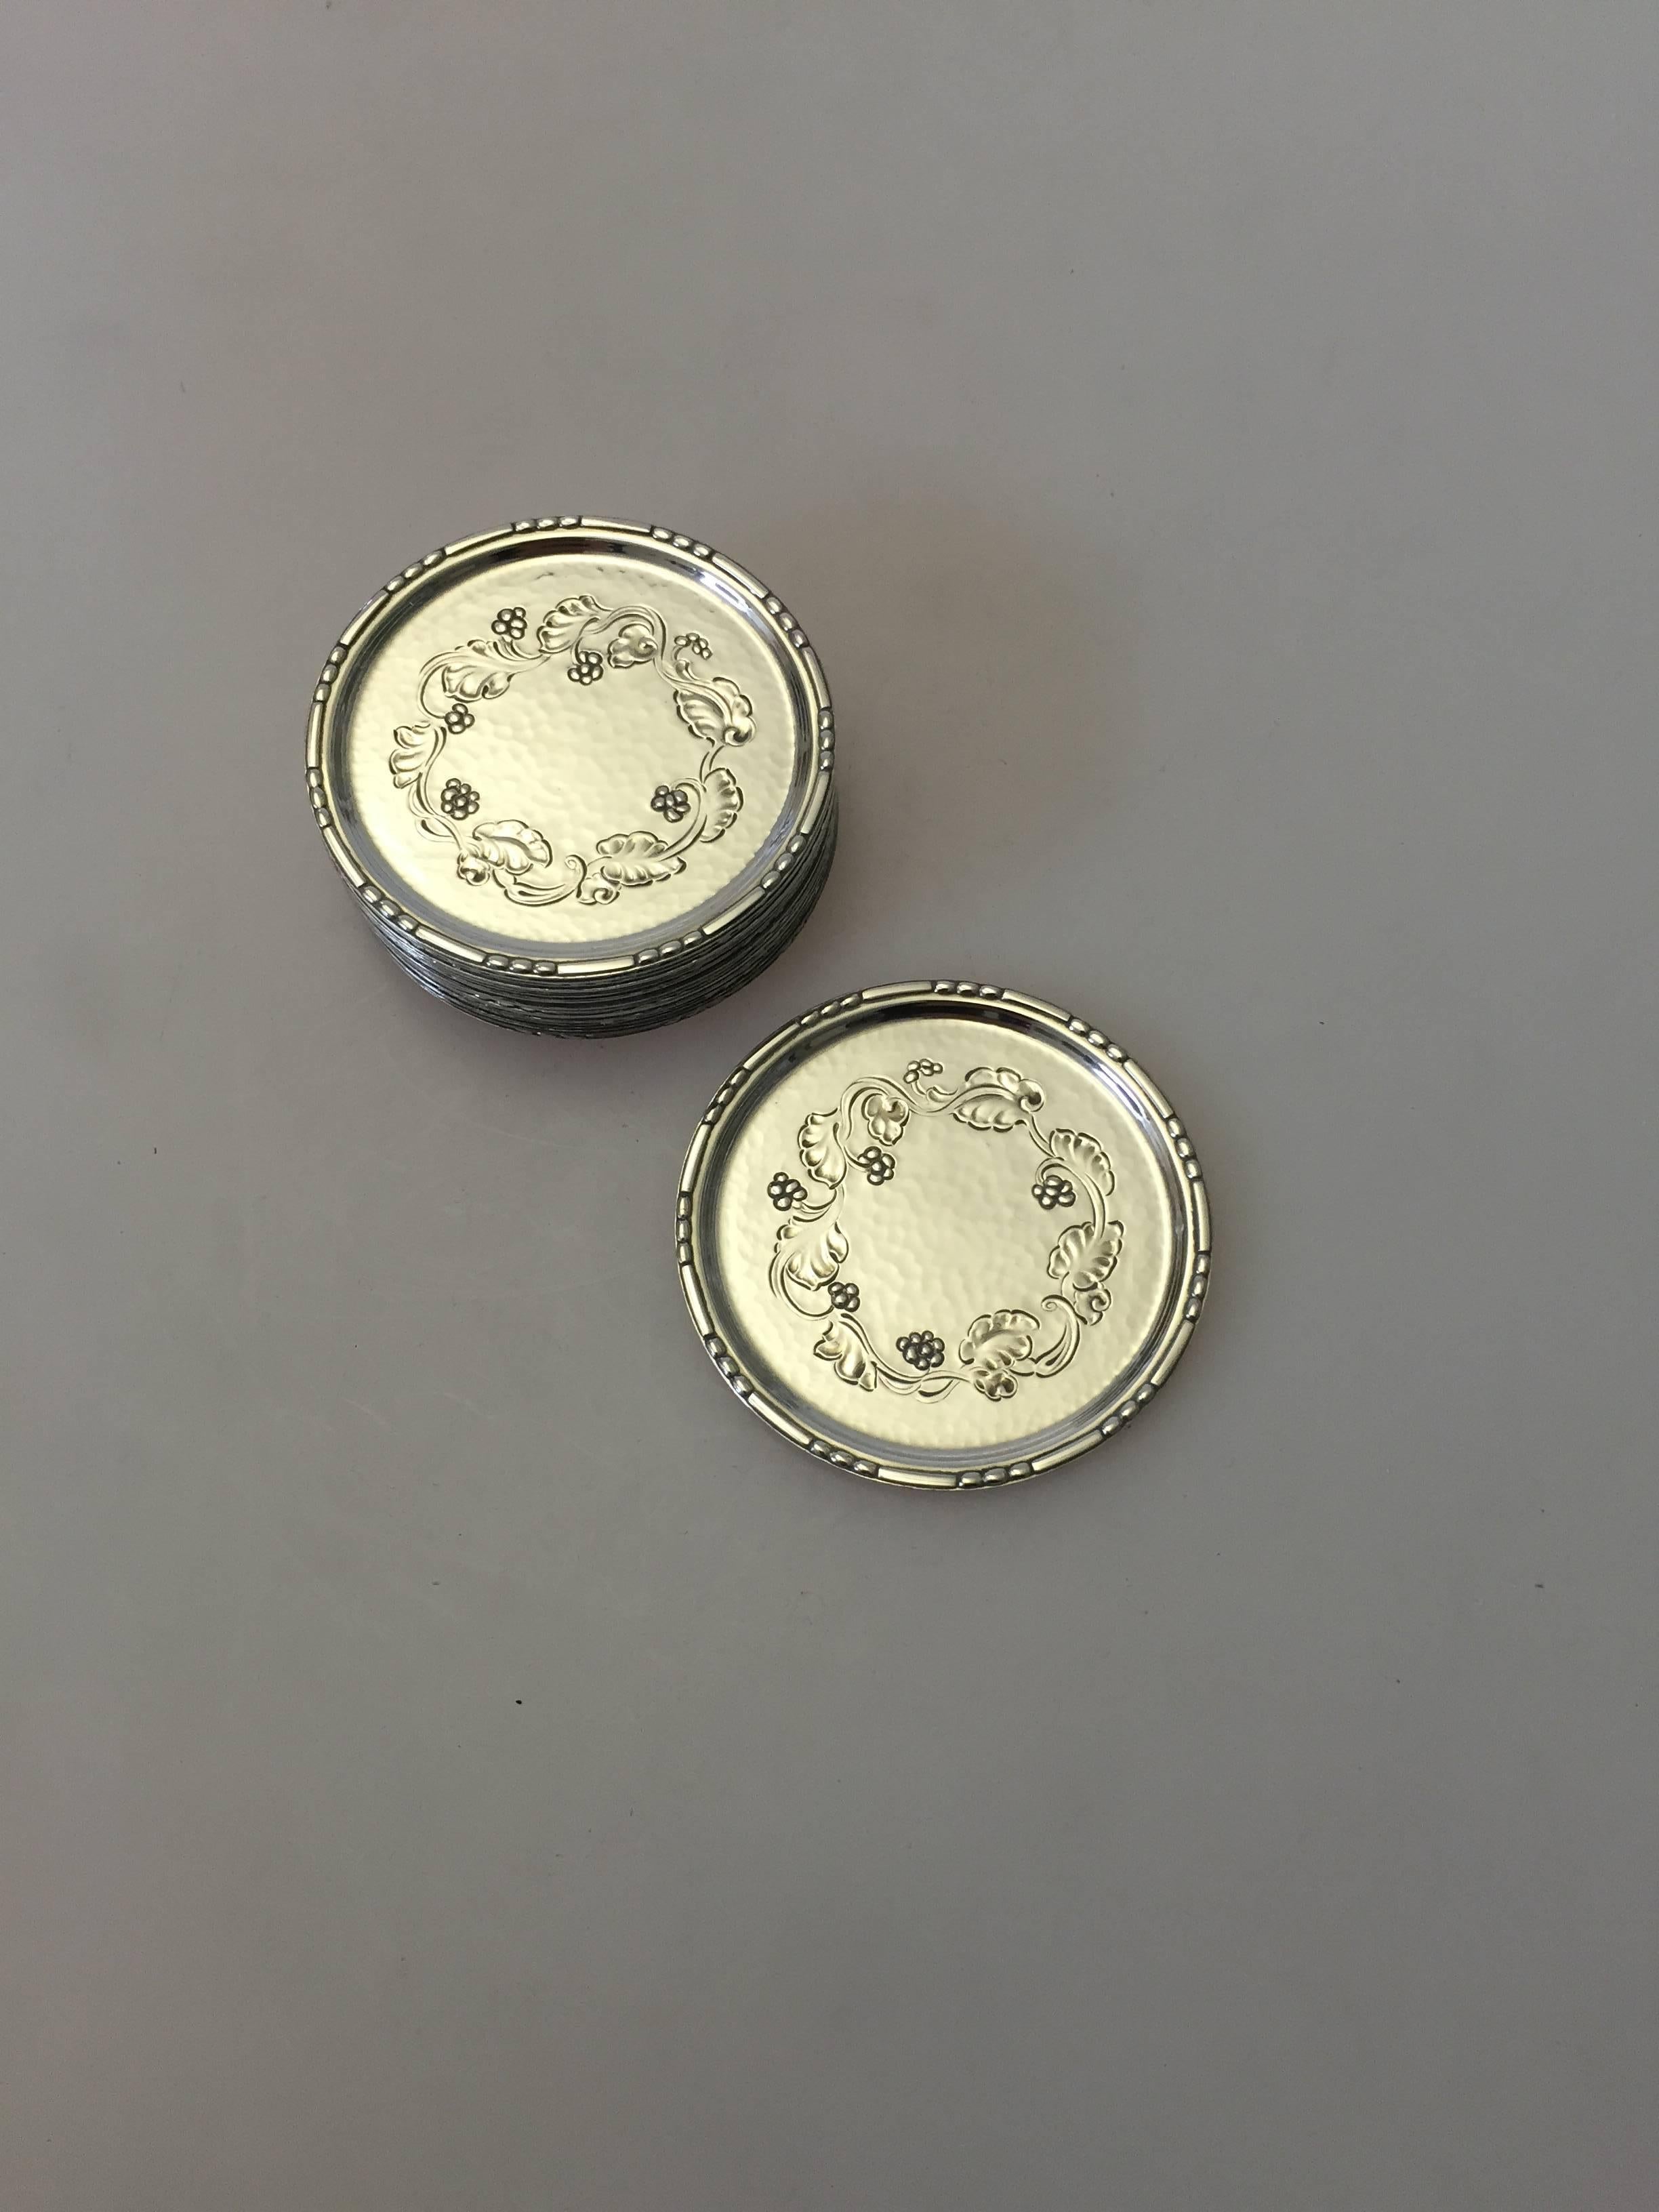 Georg Jensen sterling silver Harald Nielsen glass coasters with floral pattern. Diameter measures 6 cm and is in good condition. We currently have seven in loose stock and another 12, that we sell as a set.

Harald Nielsen (1892-1977) was the